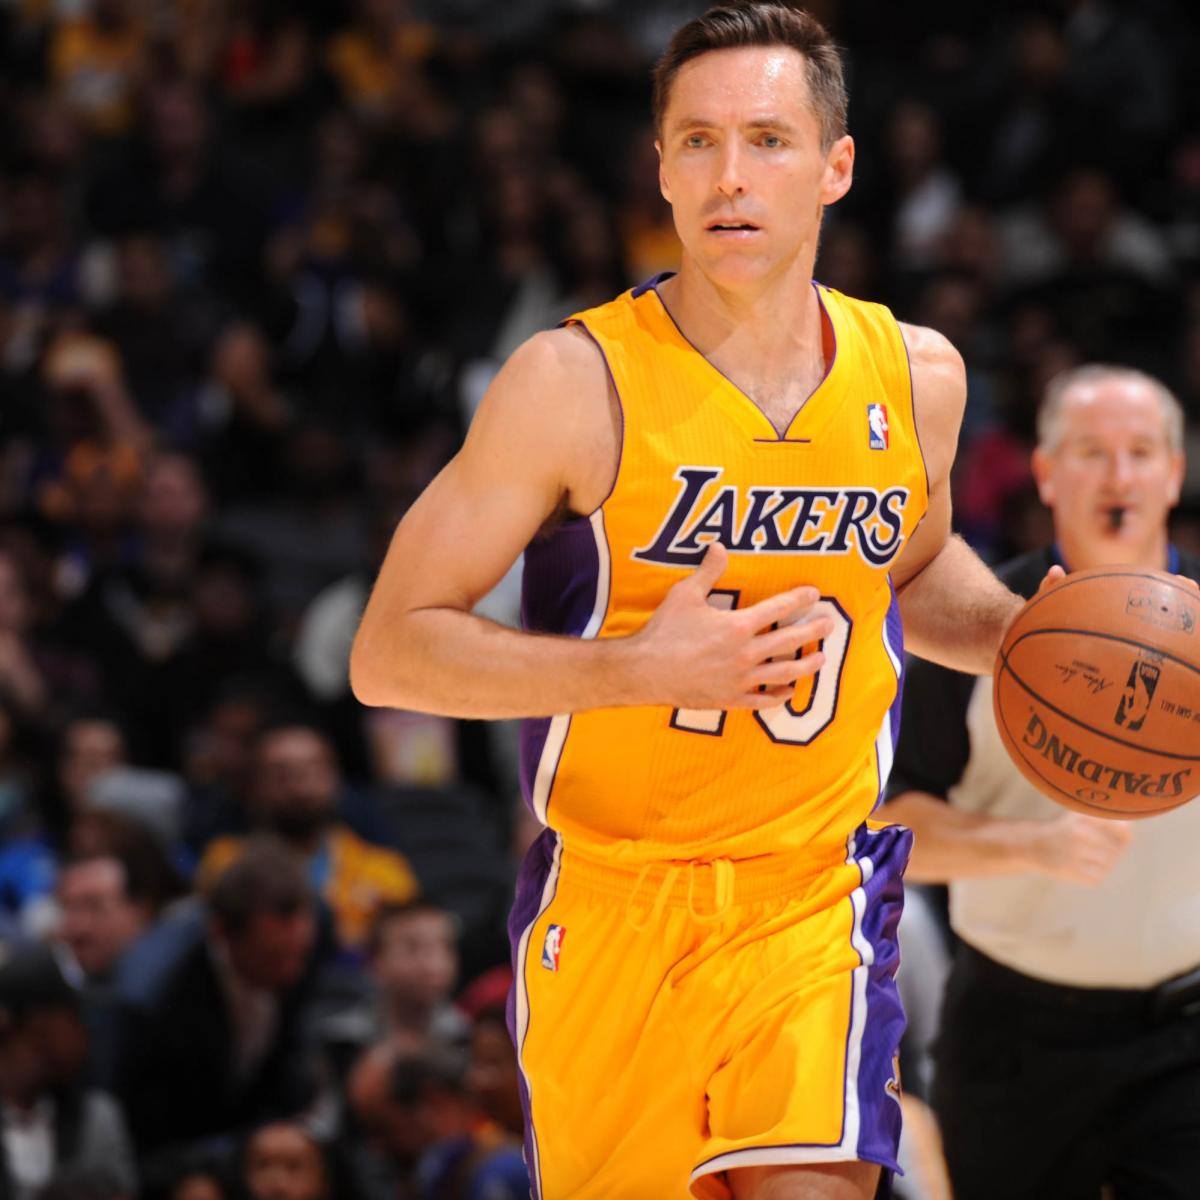 Steve Nash surprised to find himself with Lakers - The San Diego